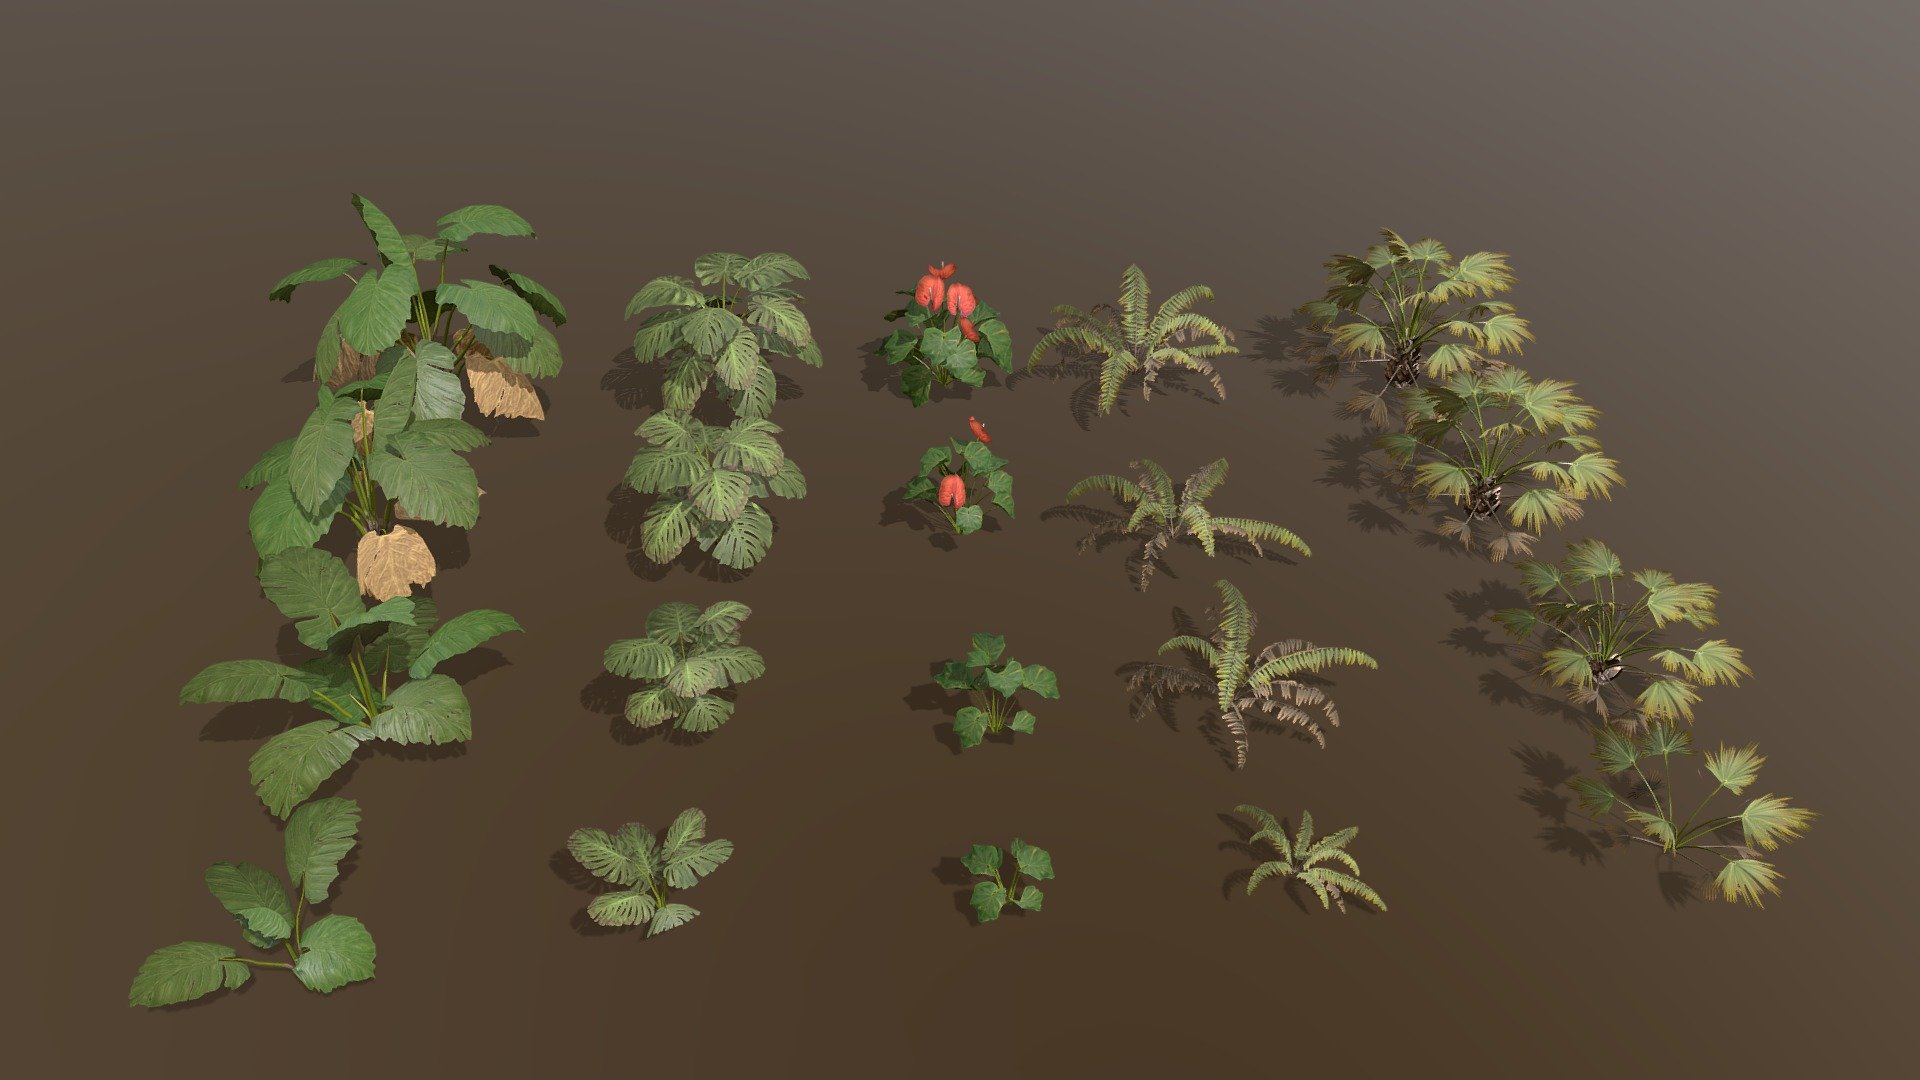 Tropical Plants Pack created in treeit.

alocasia macrorrhiza, 
Anthurium ,
fern,
monstera deliciosa,
needle palm,

Please check out my free models on my sketchfab profile made in treeit for compatibility.

Includes 20 diffrent models.

Each modle has the main model + 4 levels of detail, last LOD is an 8 poly imposter/billboard.

Exported to .fbx .obj .dbo

fbx/dbo format includes vertex colors for vertex shader wind animation.

Includes the tree it .tre project.

Texture size is 2k x 2.

Why am I selling this model?. Im the creator of treeit, a free tree generator that these tree models are created in. Having tree packs for sale will incentivise and insure further development of the program that is in need of improvement 3d model